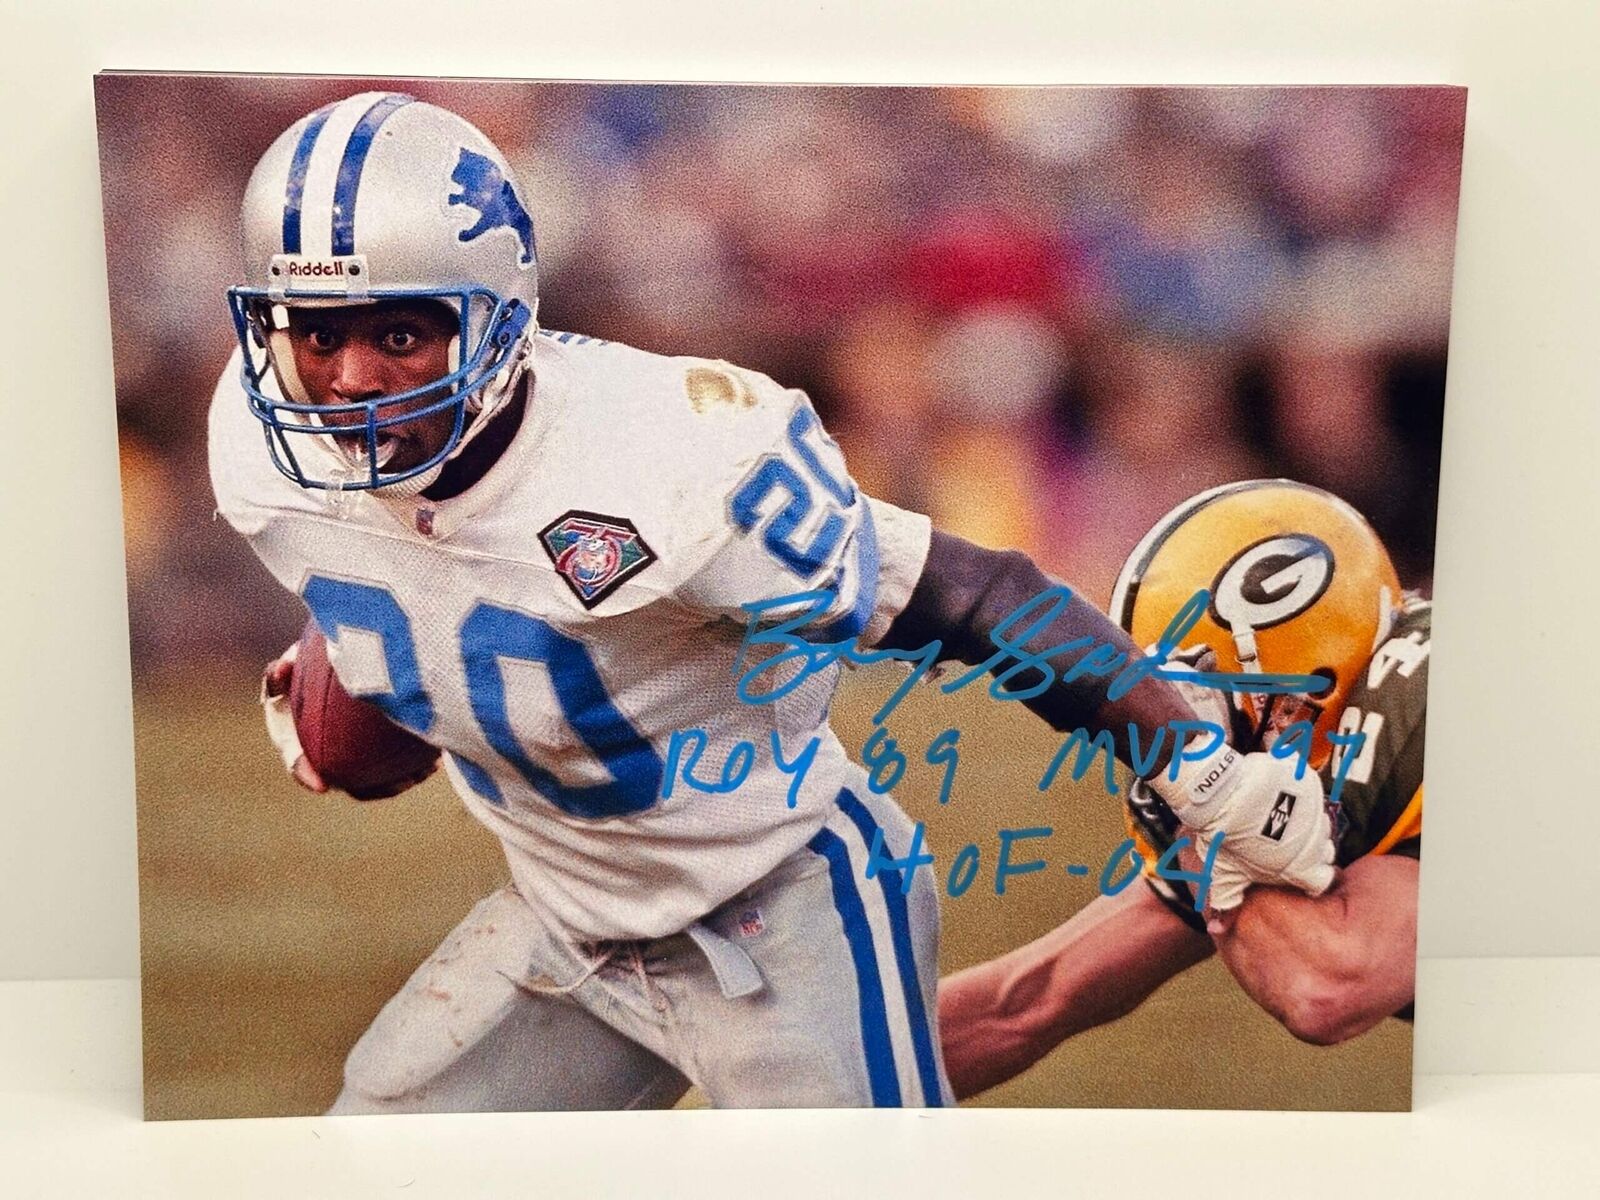 Barry Sanders Inscribed Signed Autographed Photo Authentic 8x10